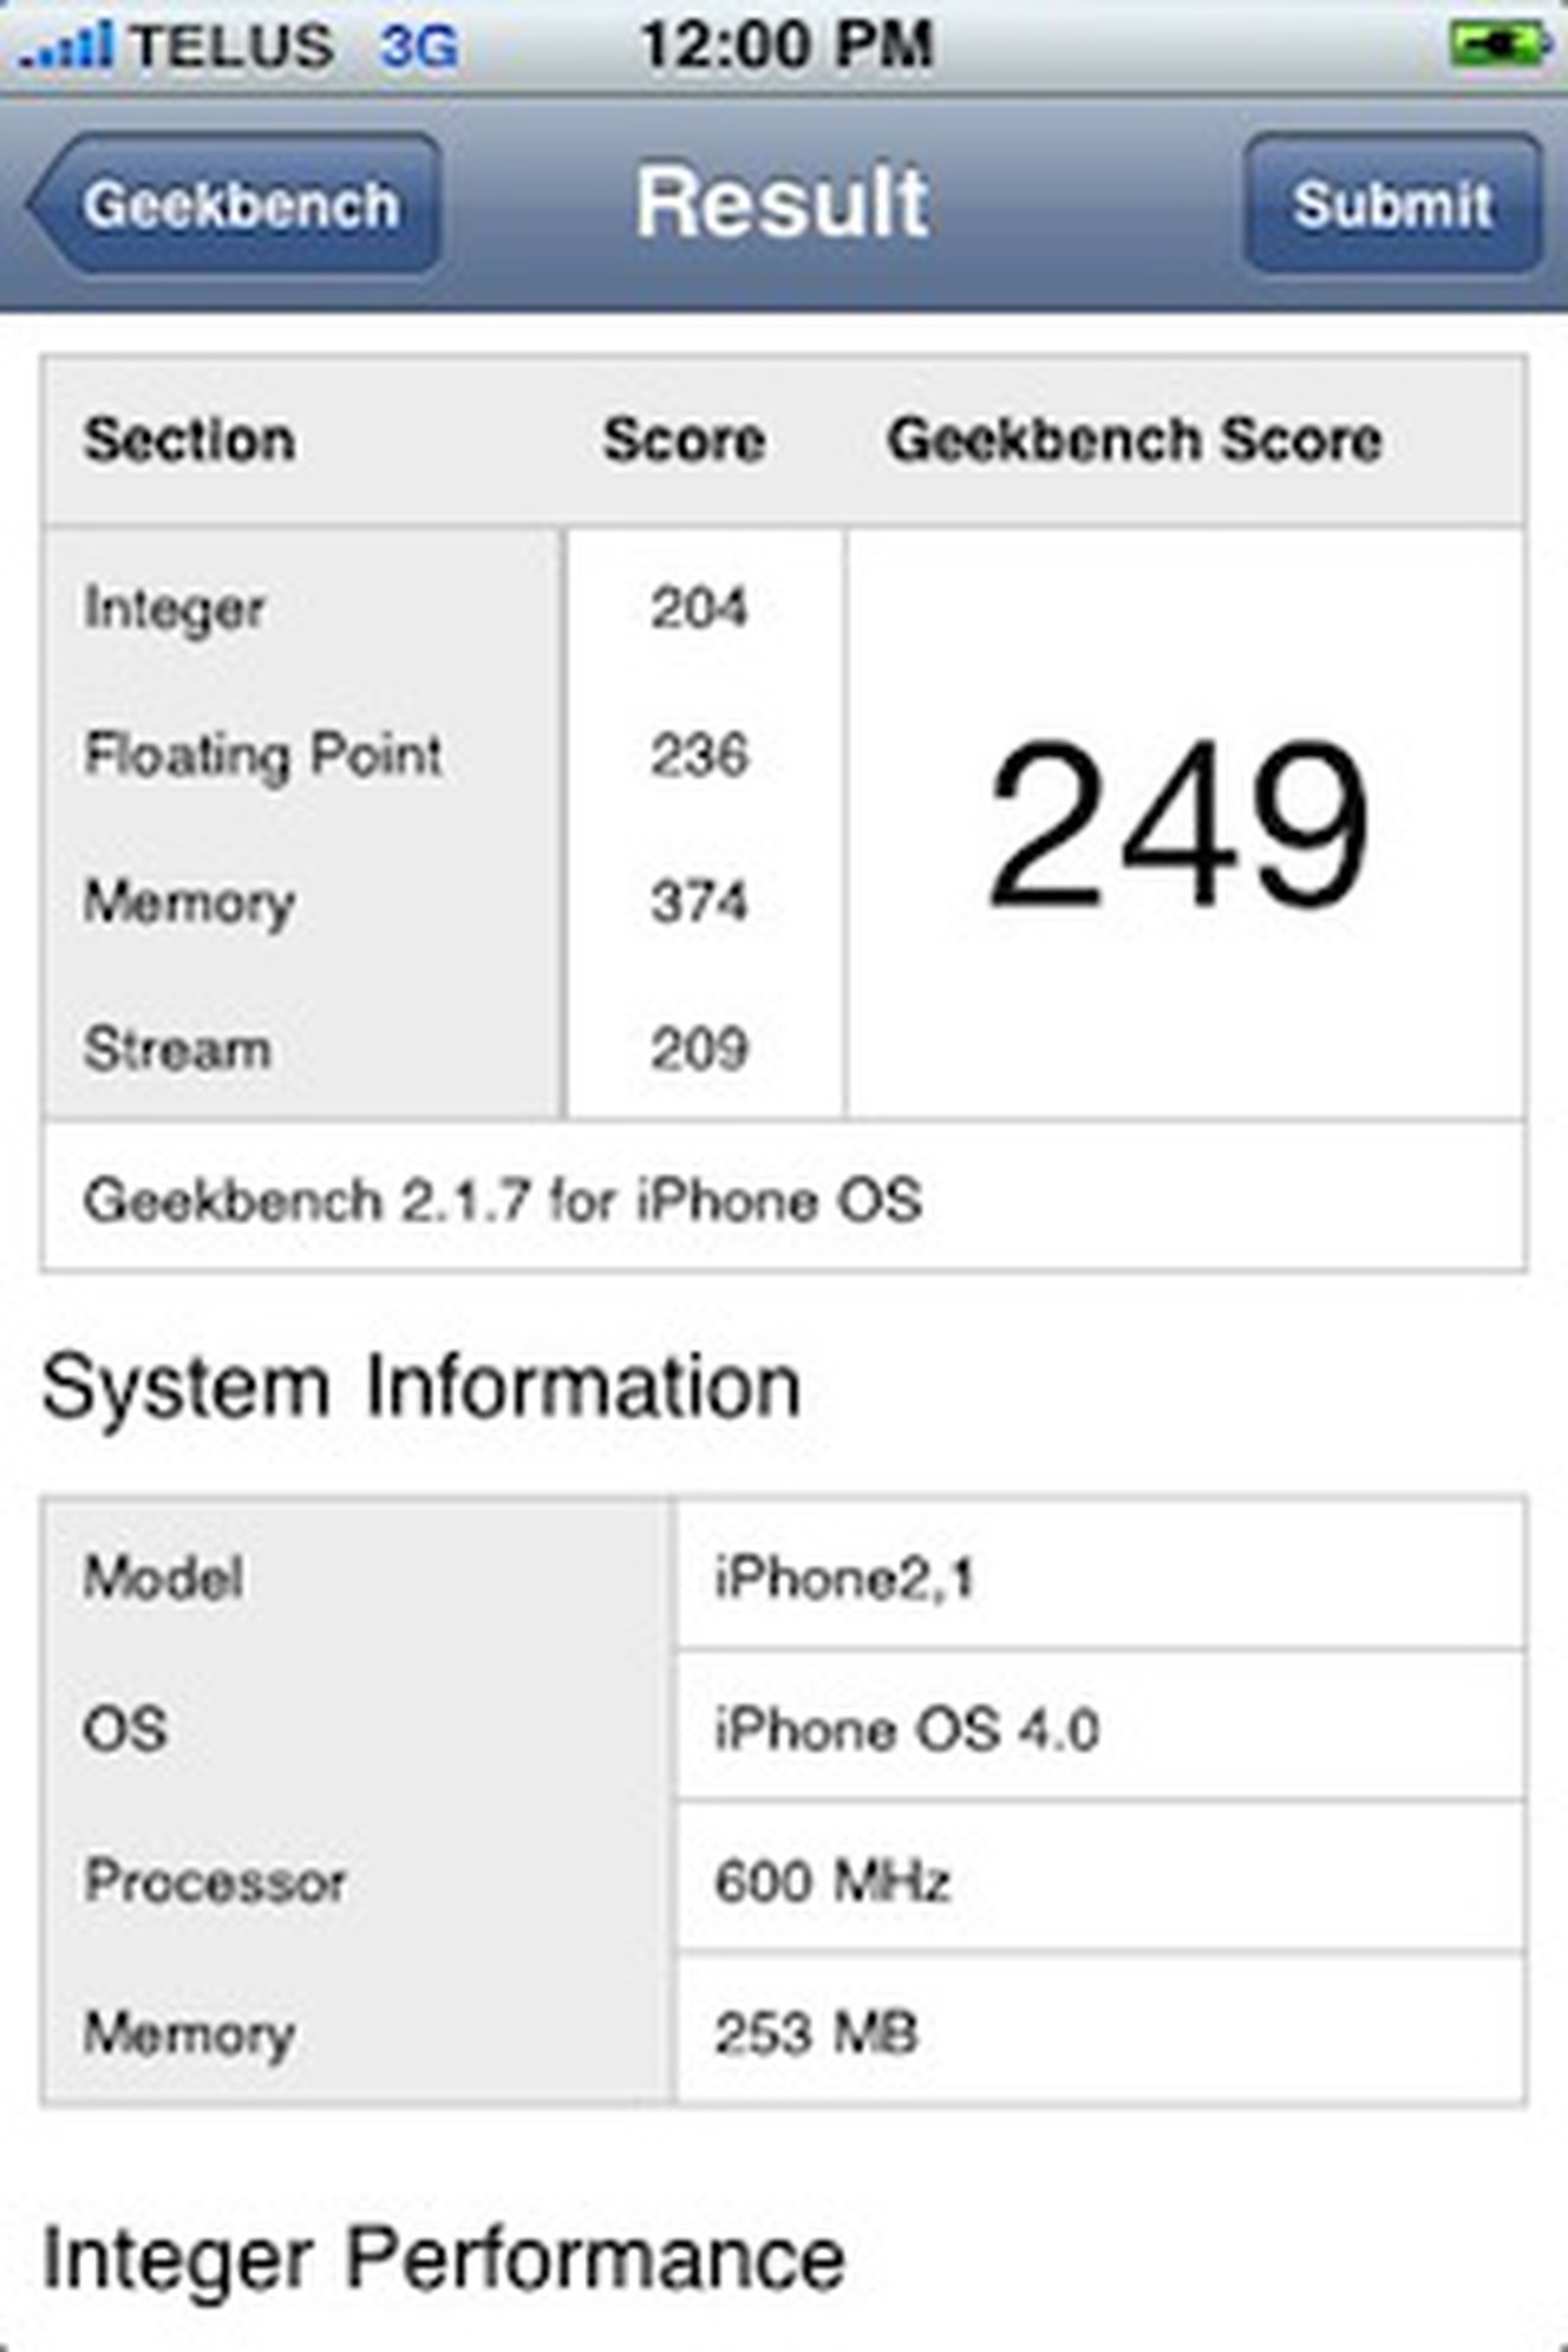 download the last version for ipod Geekbench Pro 6.2.1